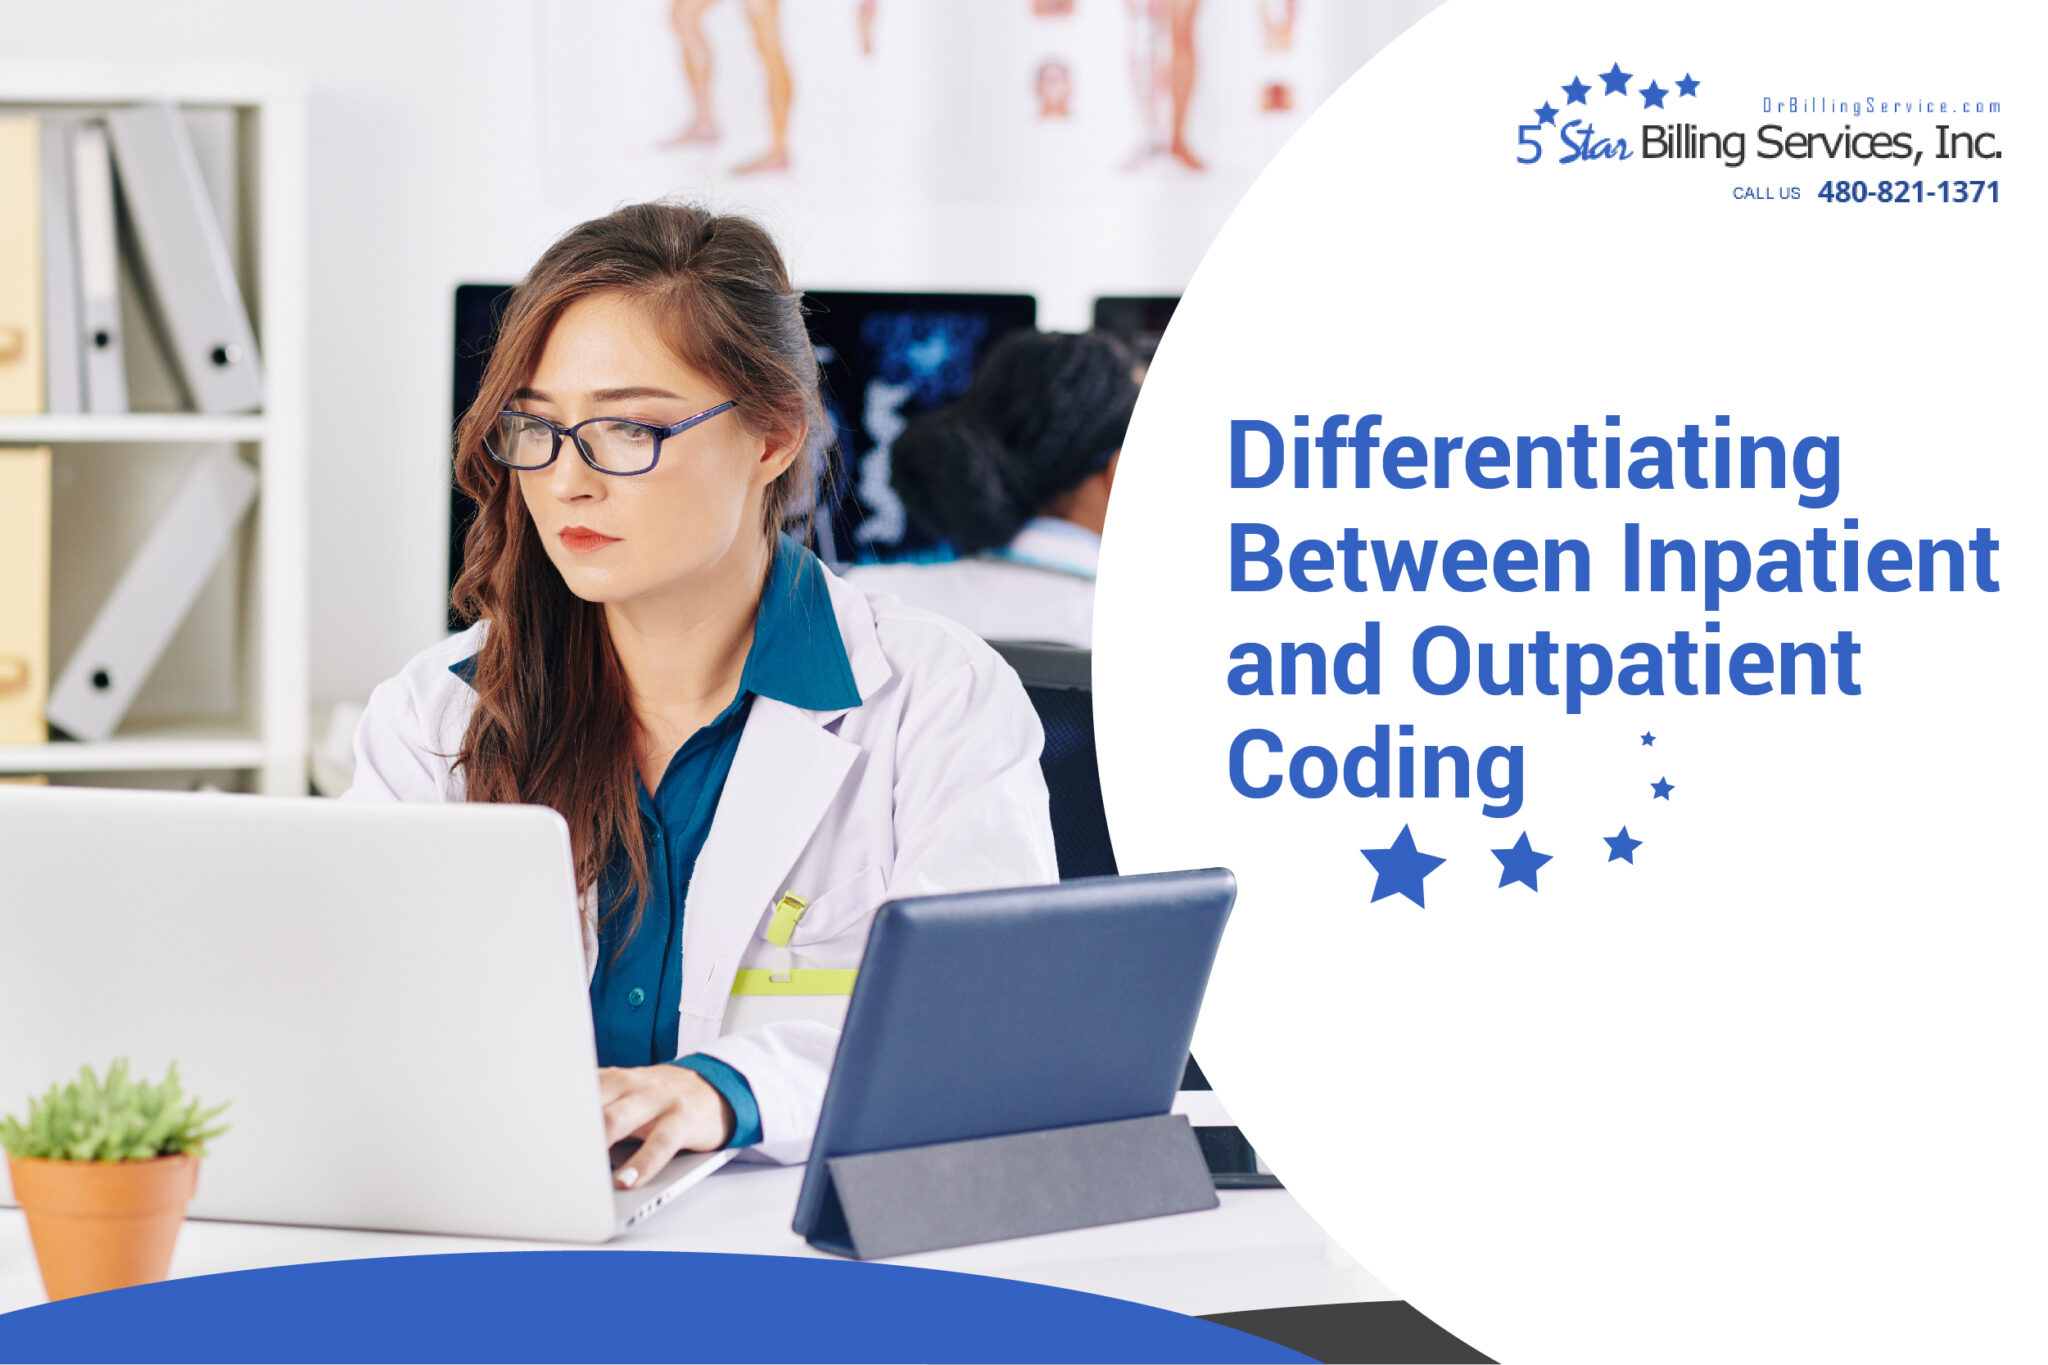 Inpatient and Outpatient Coding Rules